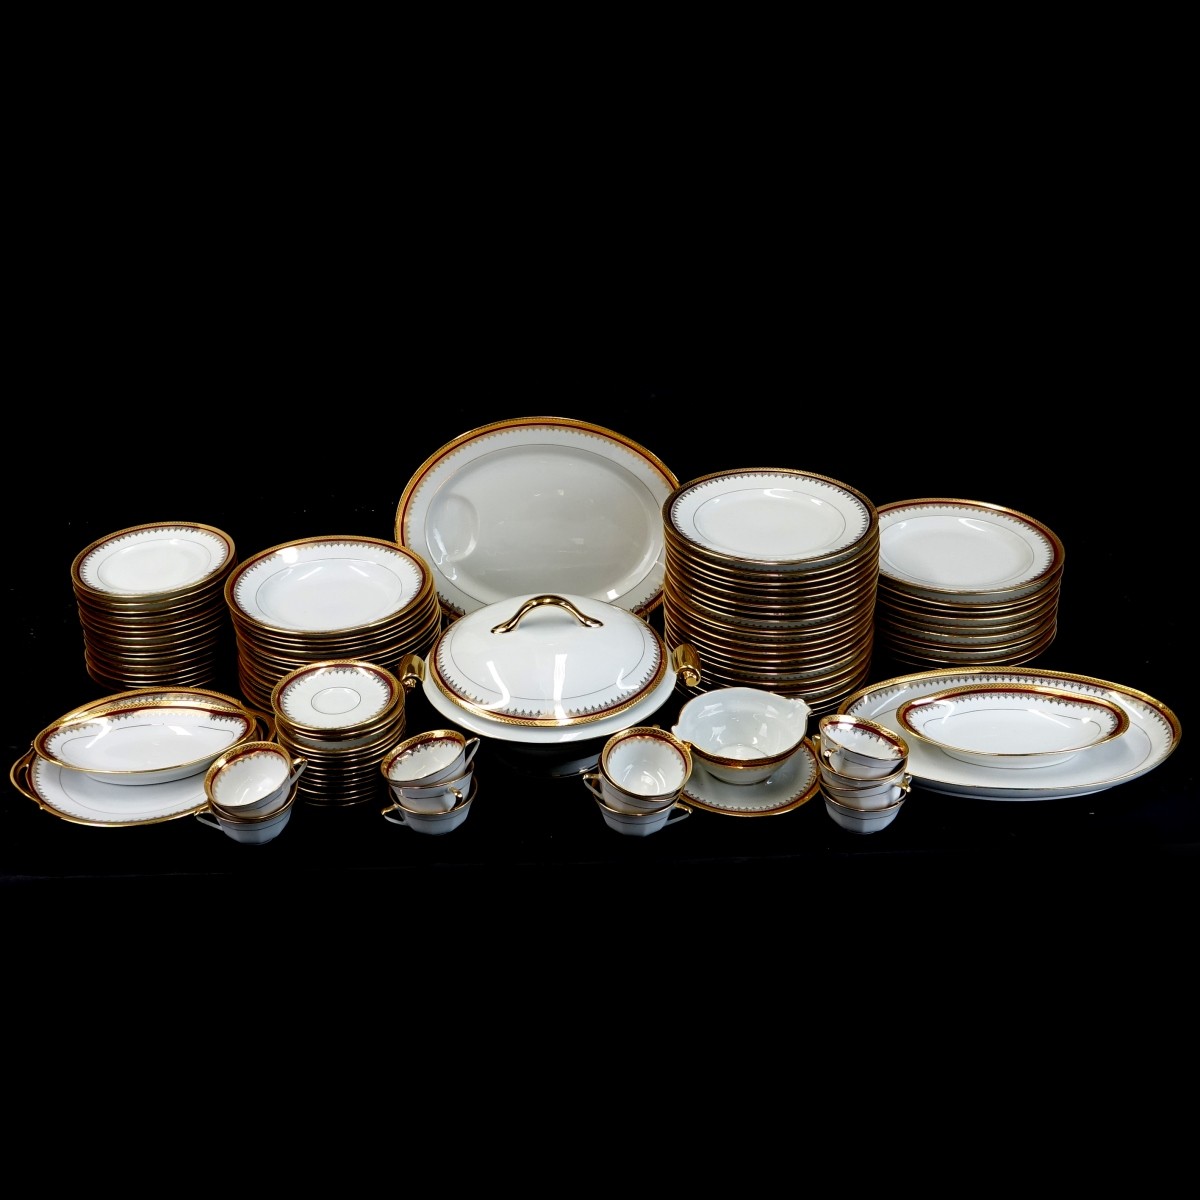 93 pc Limoges France Burgundy and Gold China Set